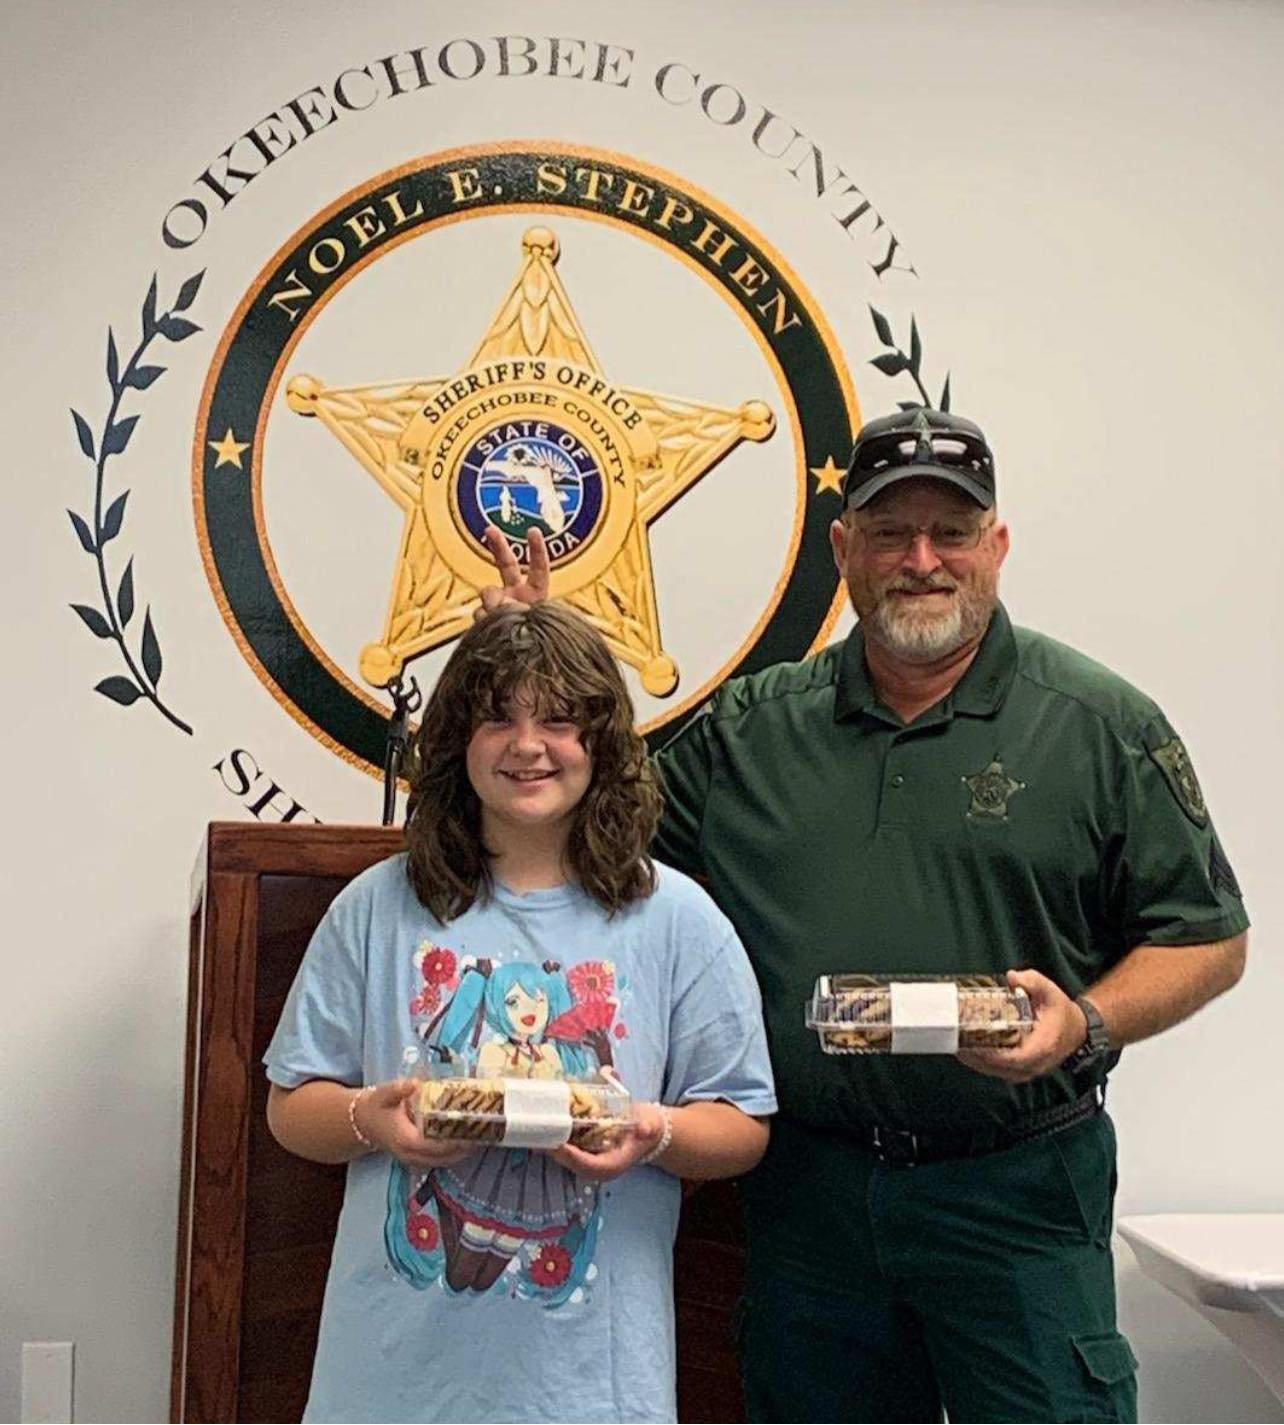 Corporal William Hill was the lucky guy to accept Miss Kay’s cookie donation for the deputies.

This amazing young woman and her mother always seem to stop by at the right time with treats for the men and women protecting and servicing!